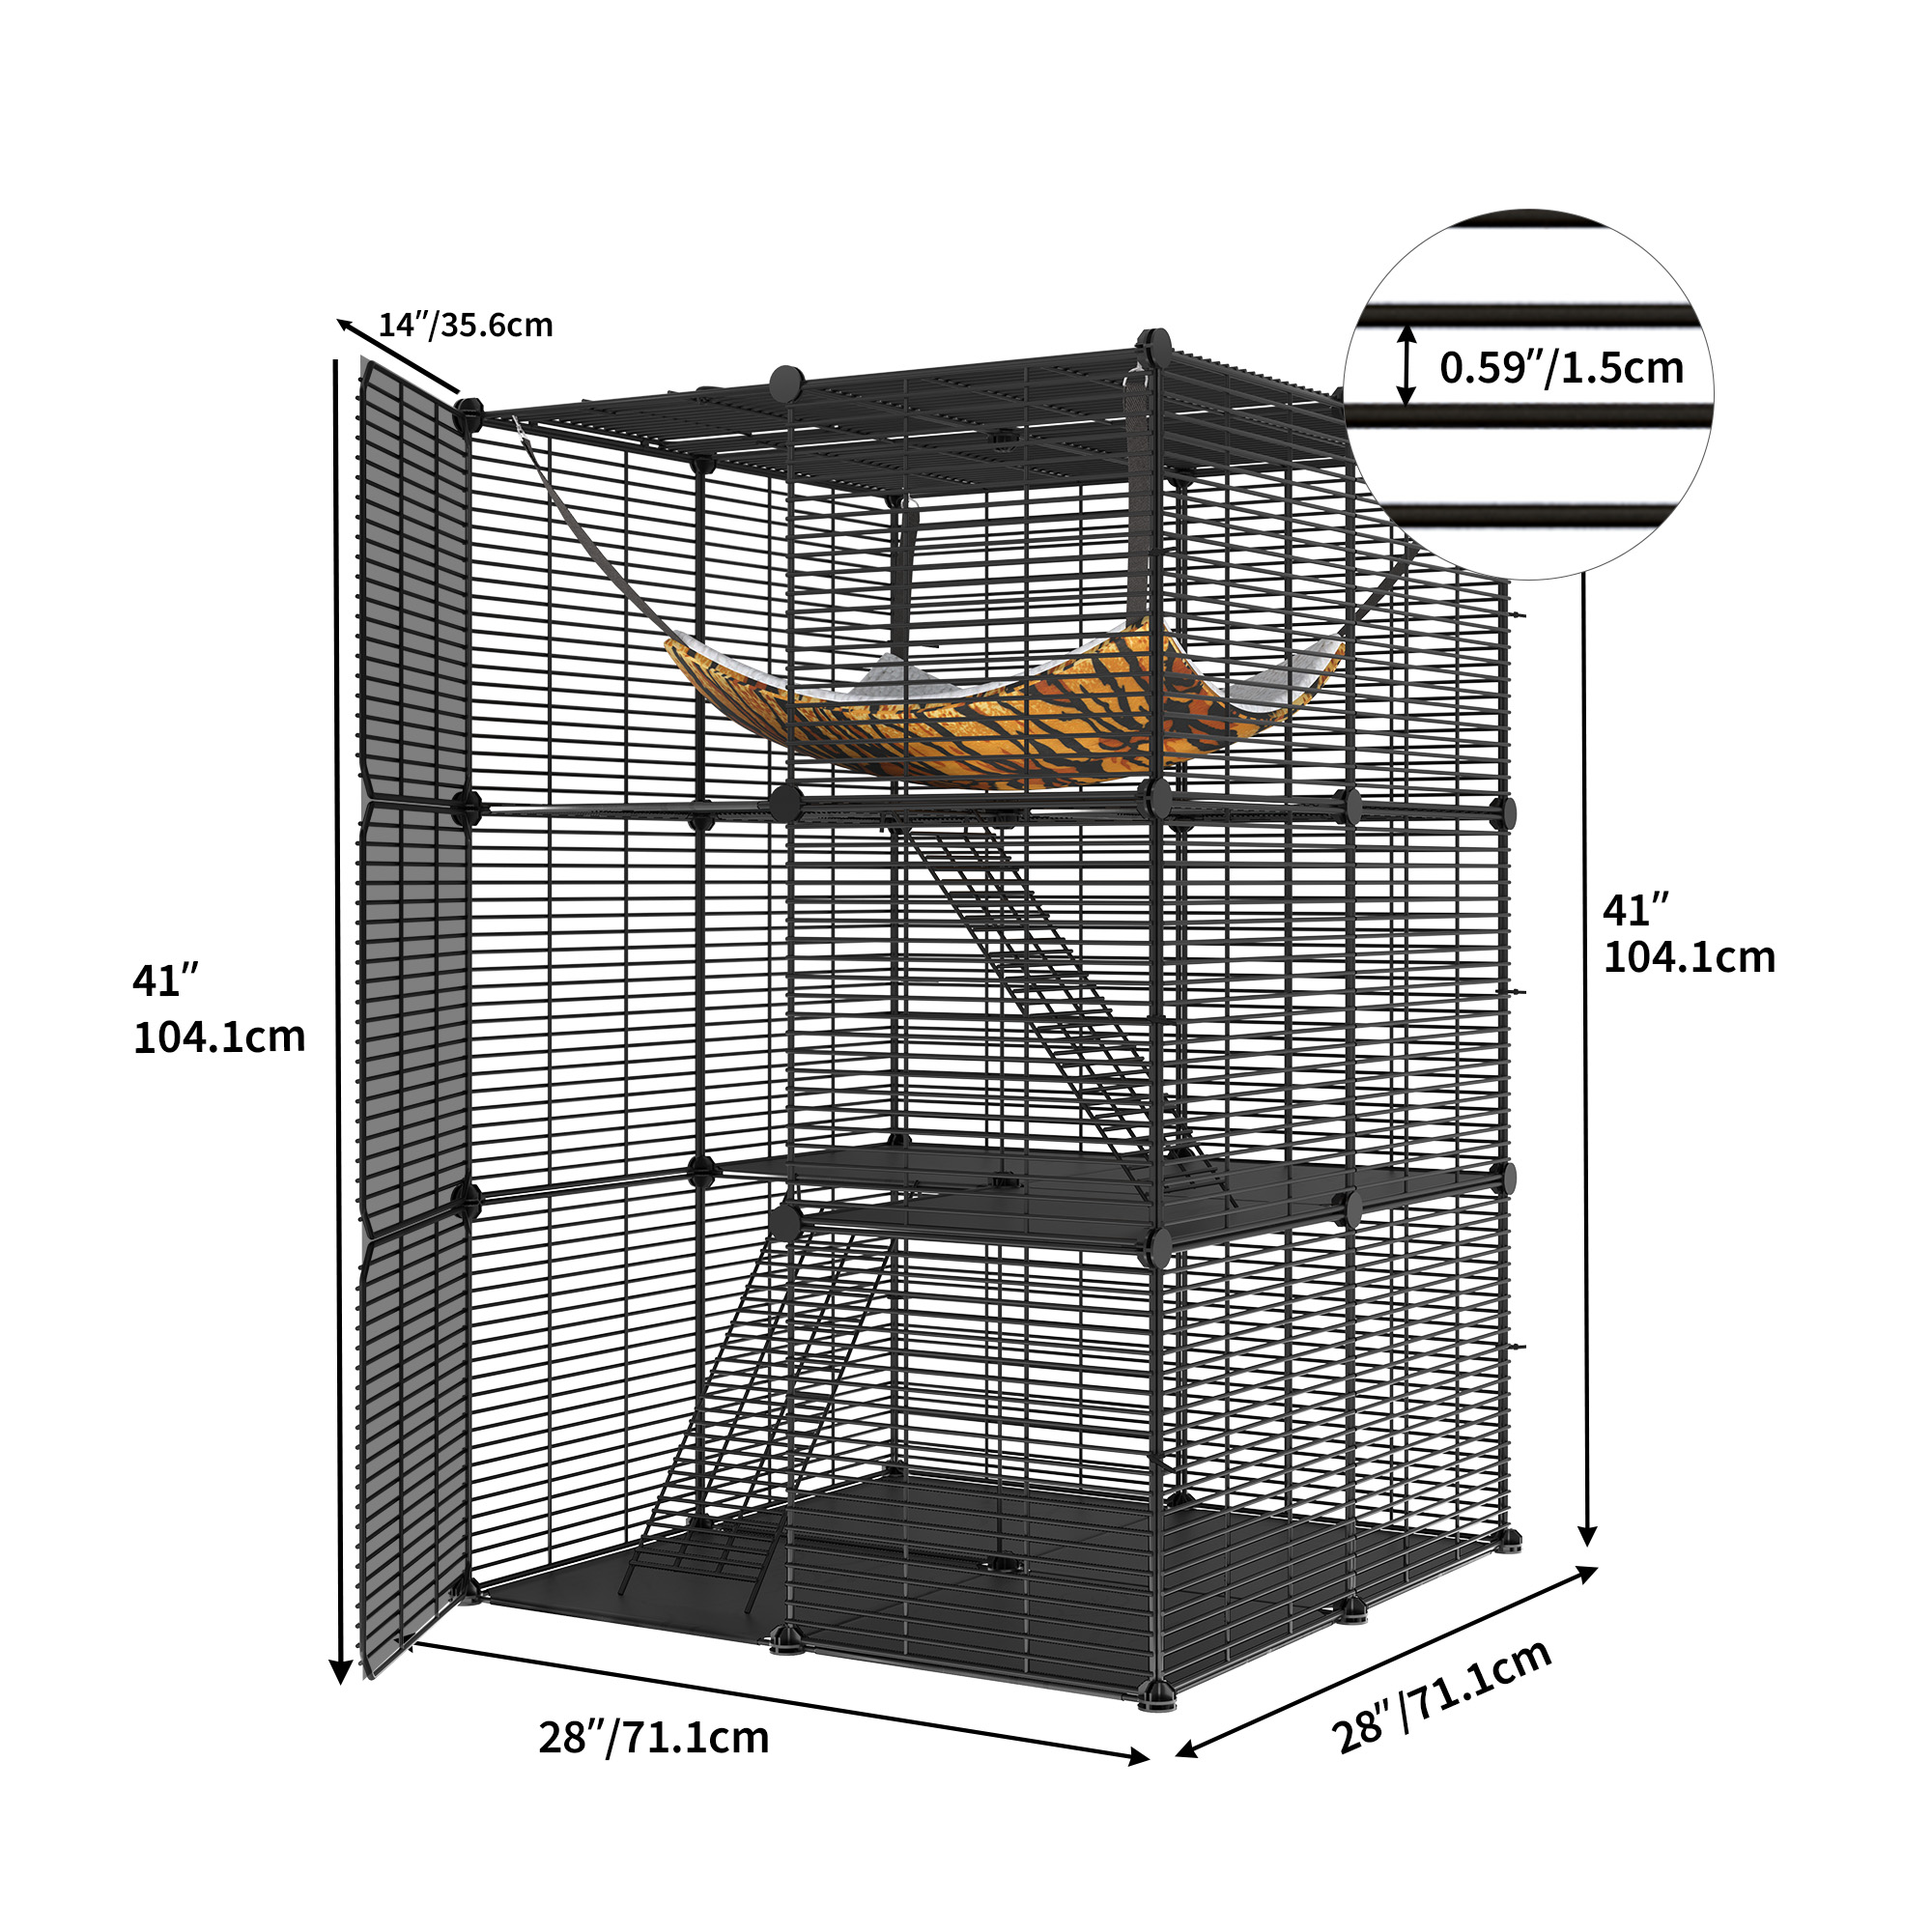 Dextrus Indoor Cat Cage with Extra Large Hammock for 1-2 Cats - DIY Cat Enclosure with Extra Large Hammock for Multiple Small Animals Cats, Ferret, Chinchilla, Rabbit,(28"L x 28"W x 41"H,Black) - image 3 of 5